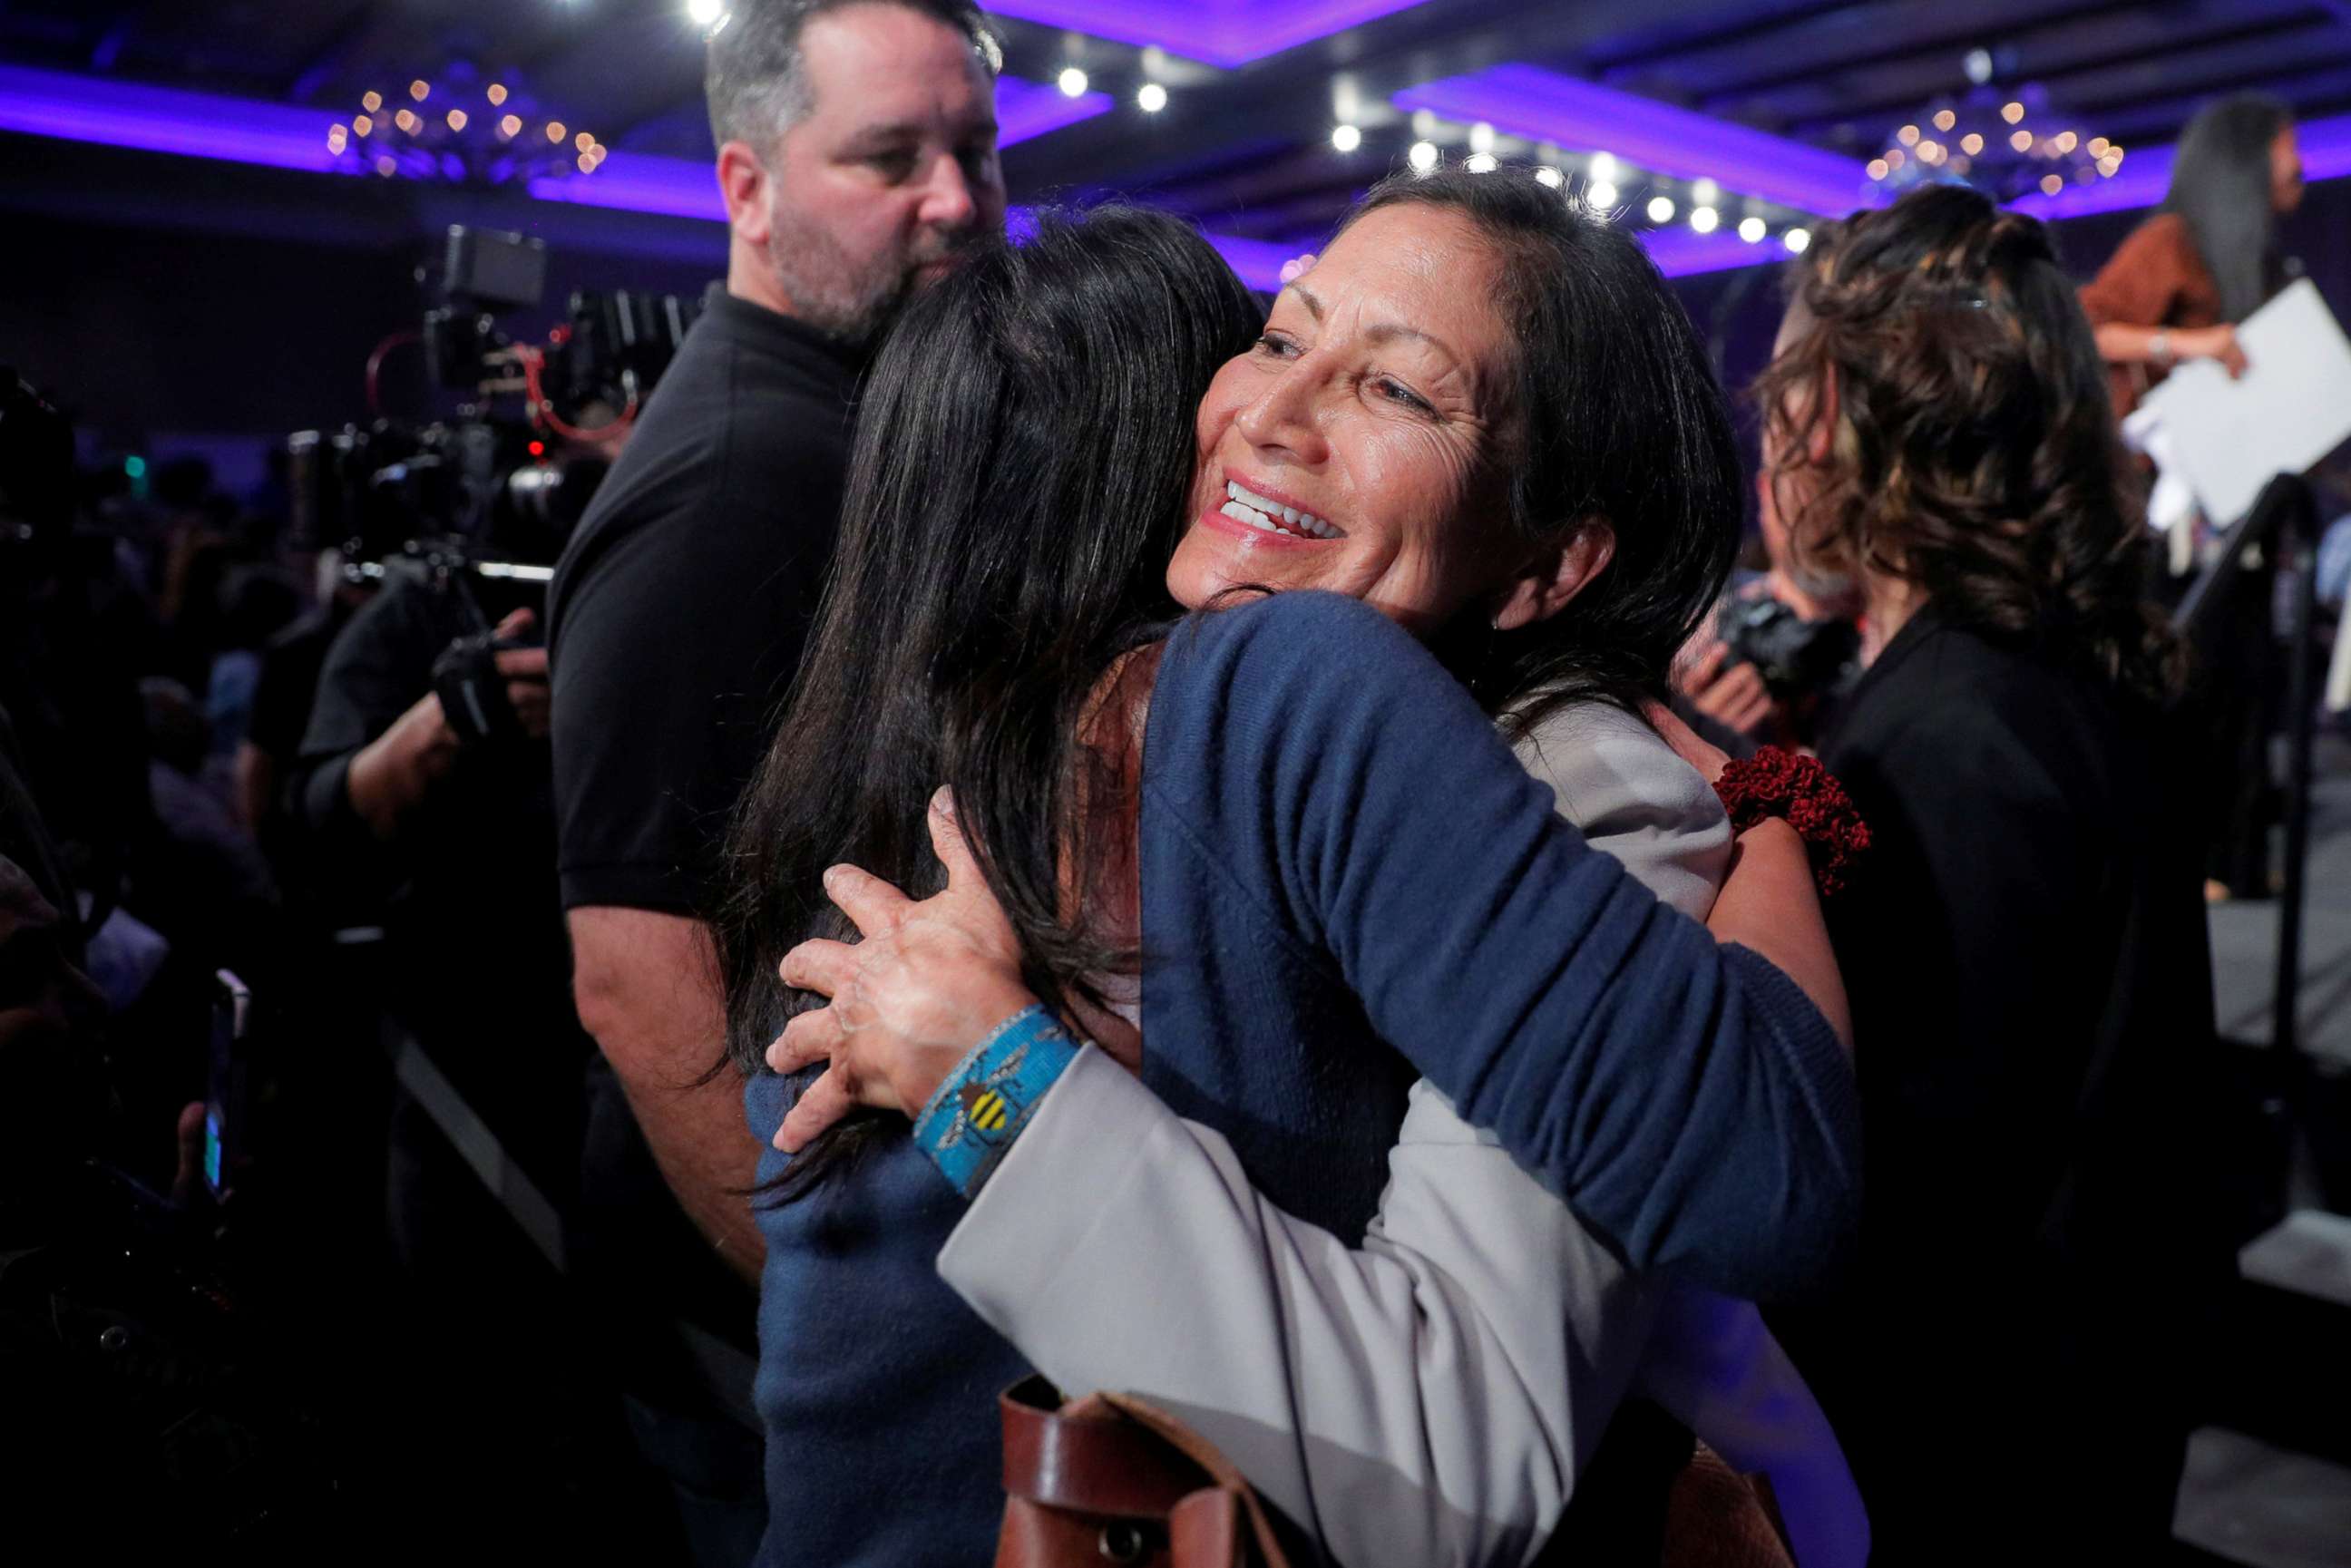 PHOTO: Democratic Congressional candidate Deb Haaland hugs a supporter after winning her midterm election in Albuquerque, New Mexico, Nov. 6, 2018.